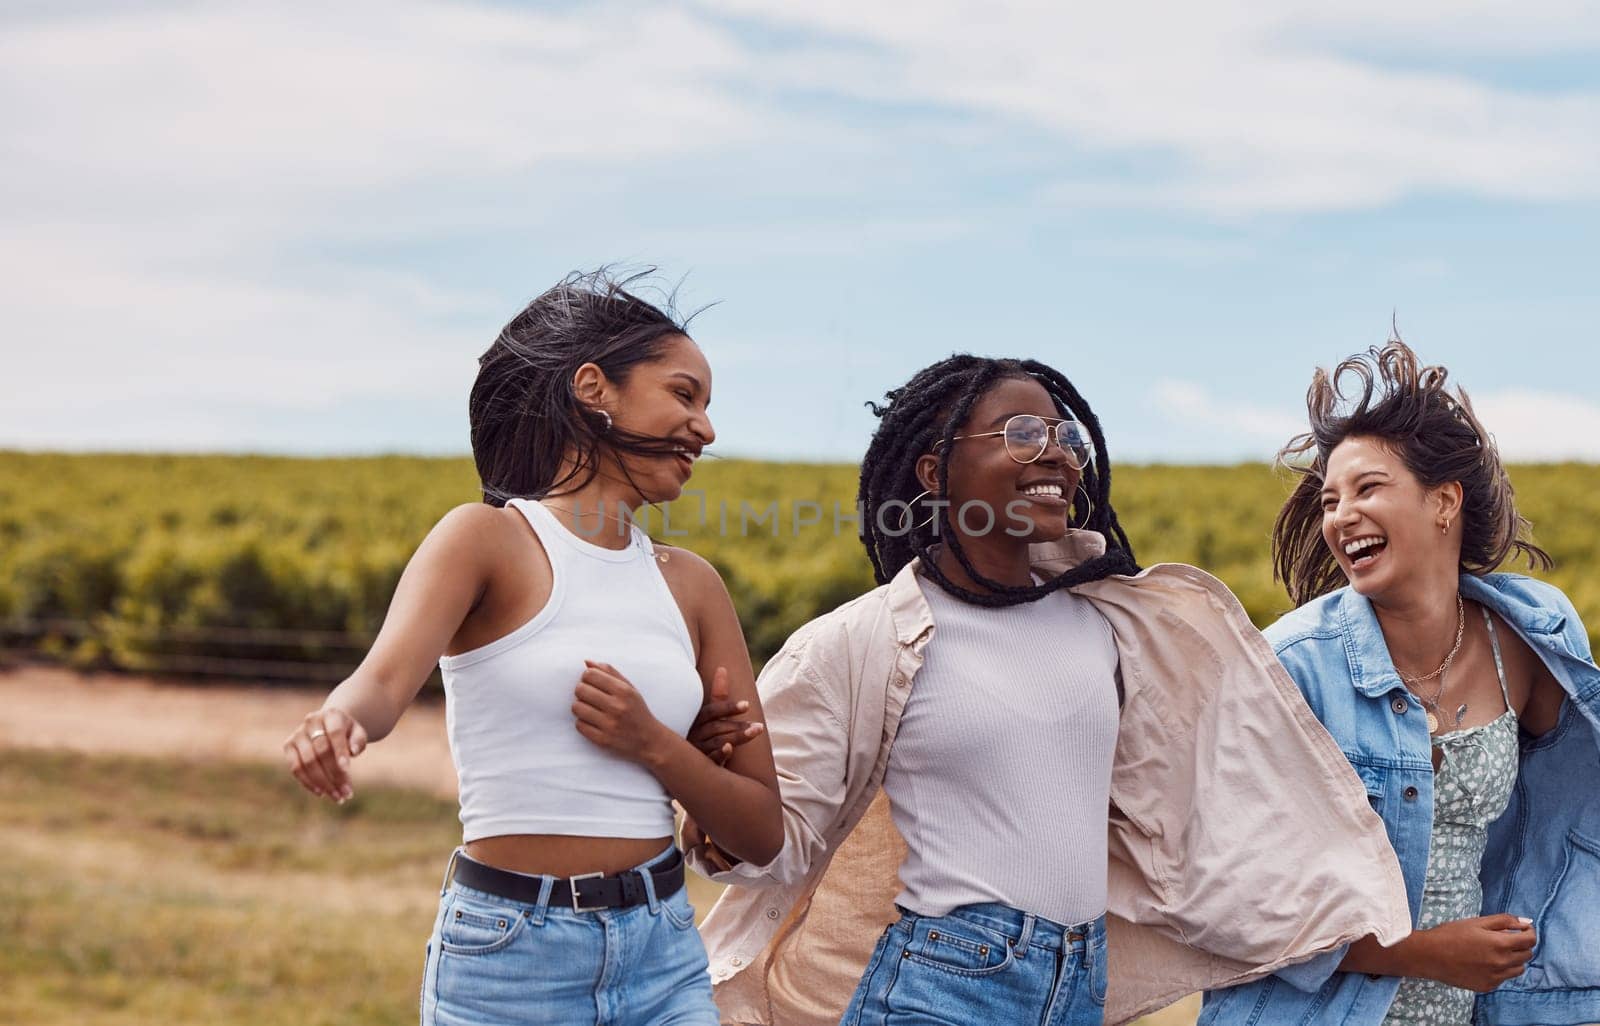 Women, friends and countryside for outdoor adventure, holiday and together for summer sunshine. Group, happy black woman and gen z students on vacation with comic laugh, support and walking in nature.